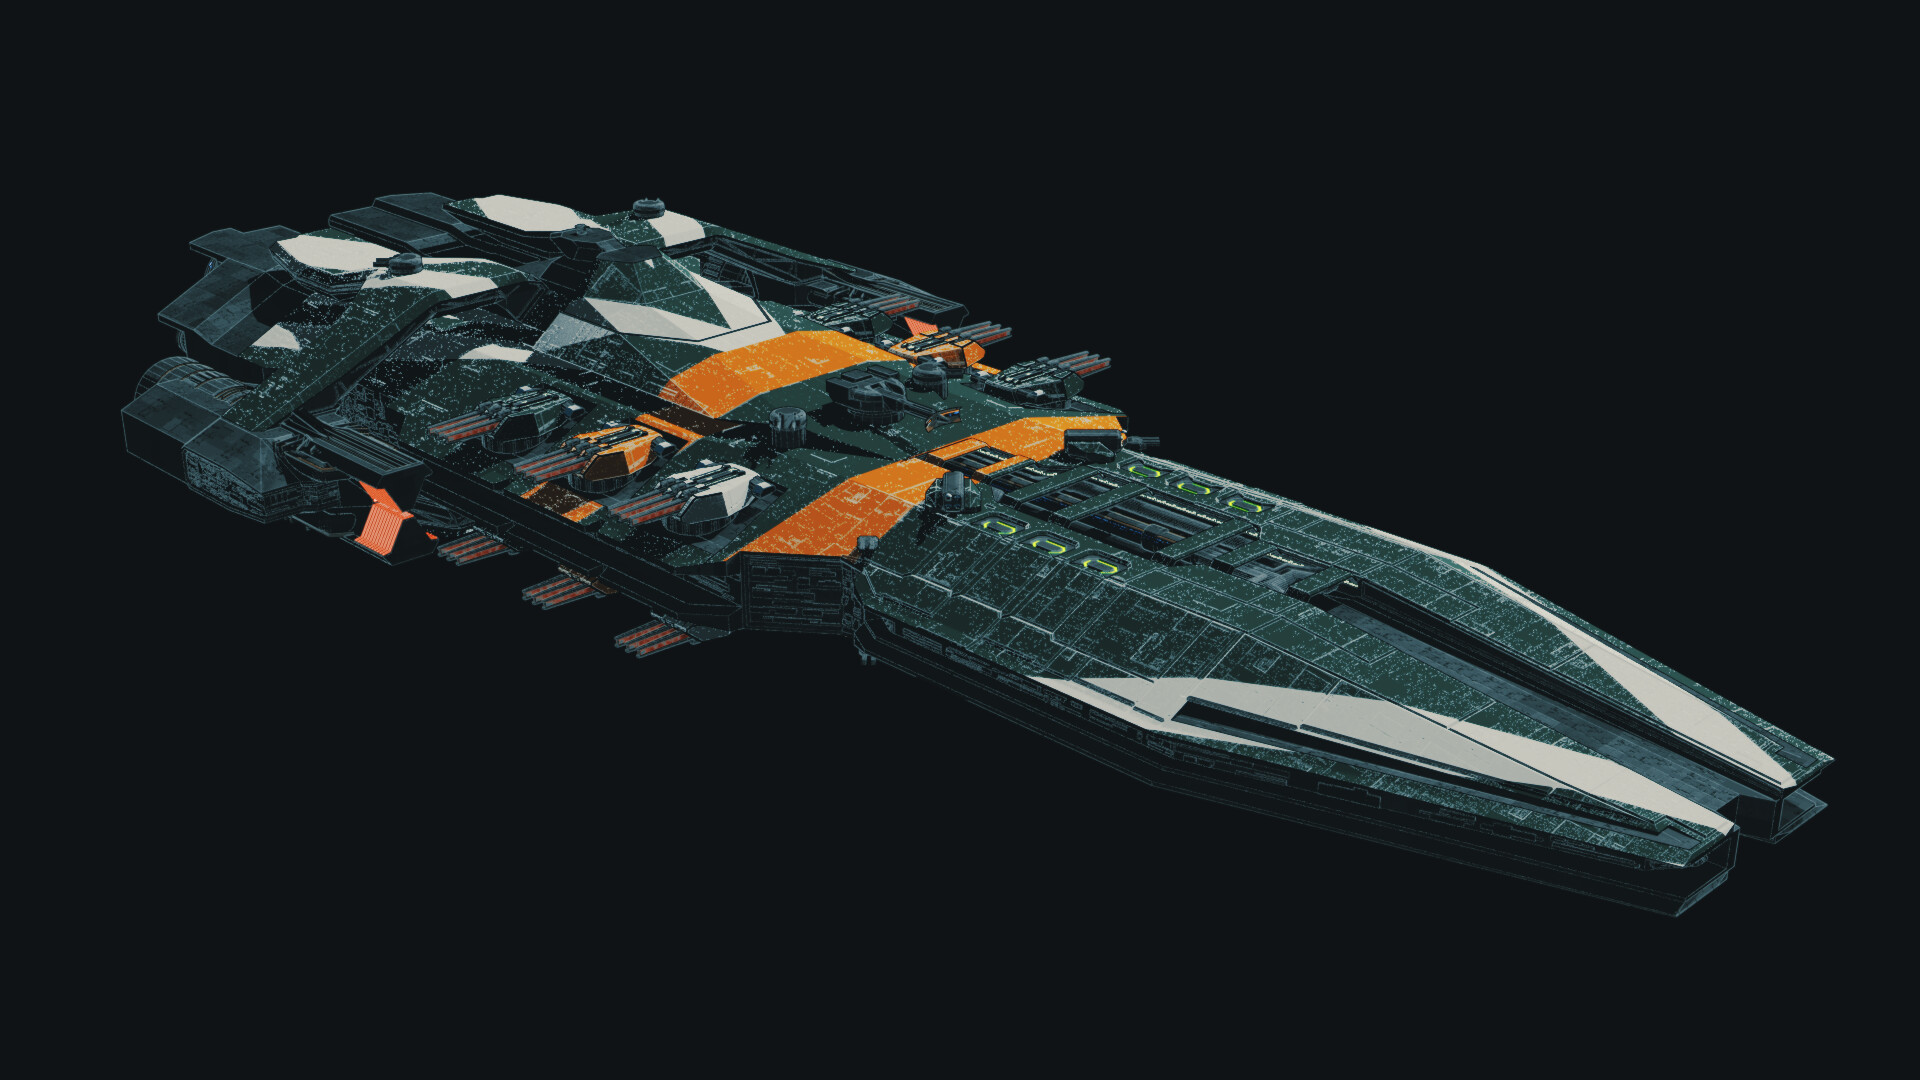 ToughSF on X: More realistic space warships by Bien Carlos Manzares. Good  work on the exhaust plumes and the radiators, as well as a vertically  symmetrical design that respects the 'no UP